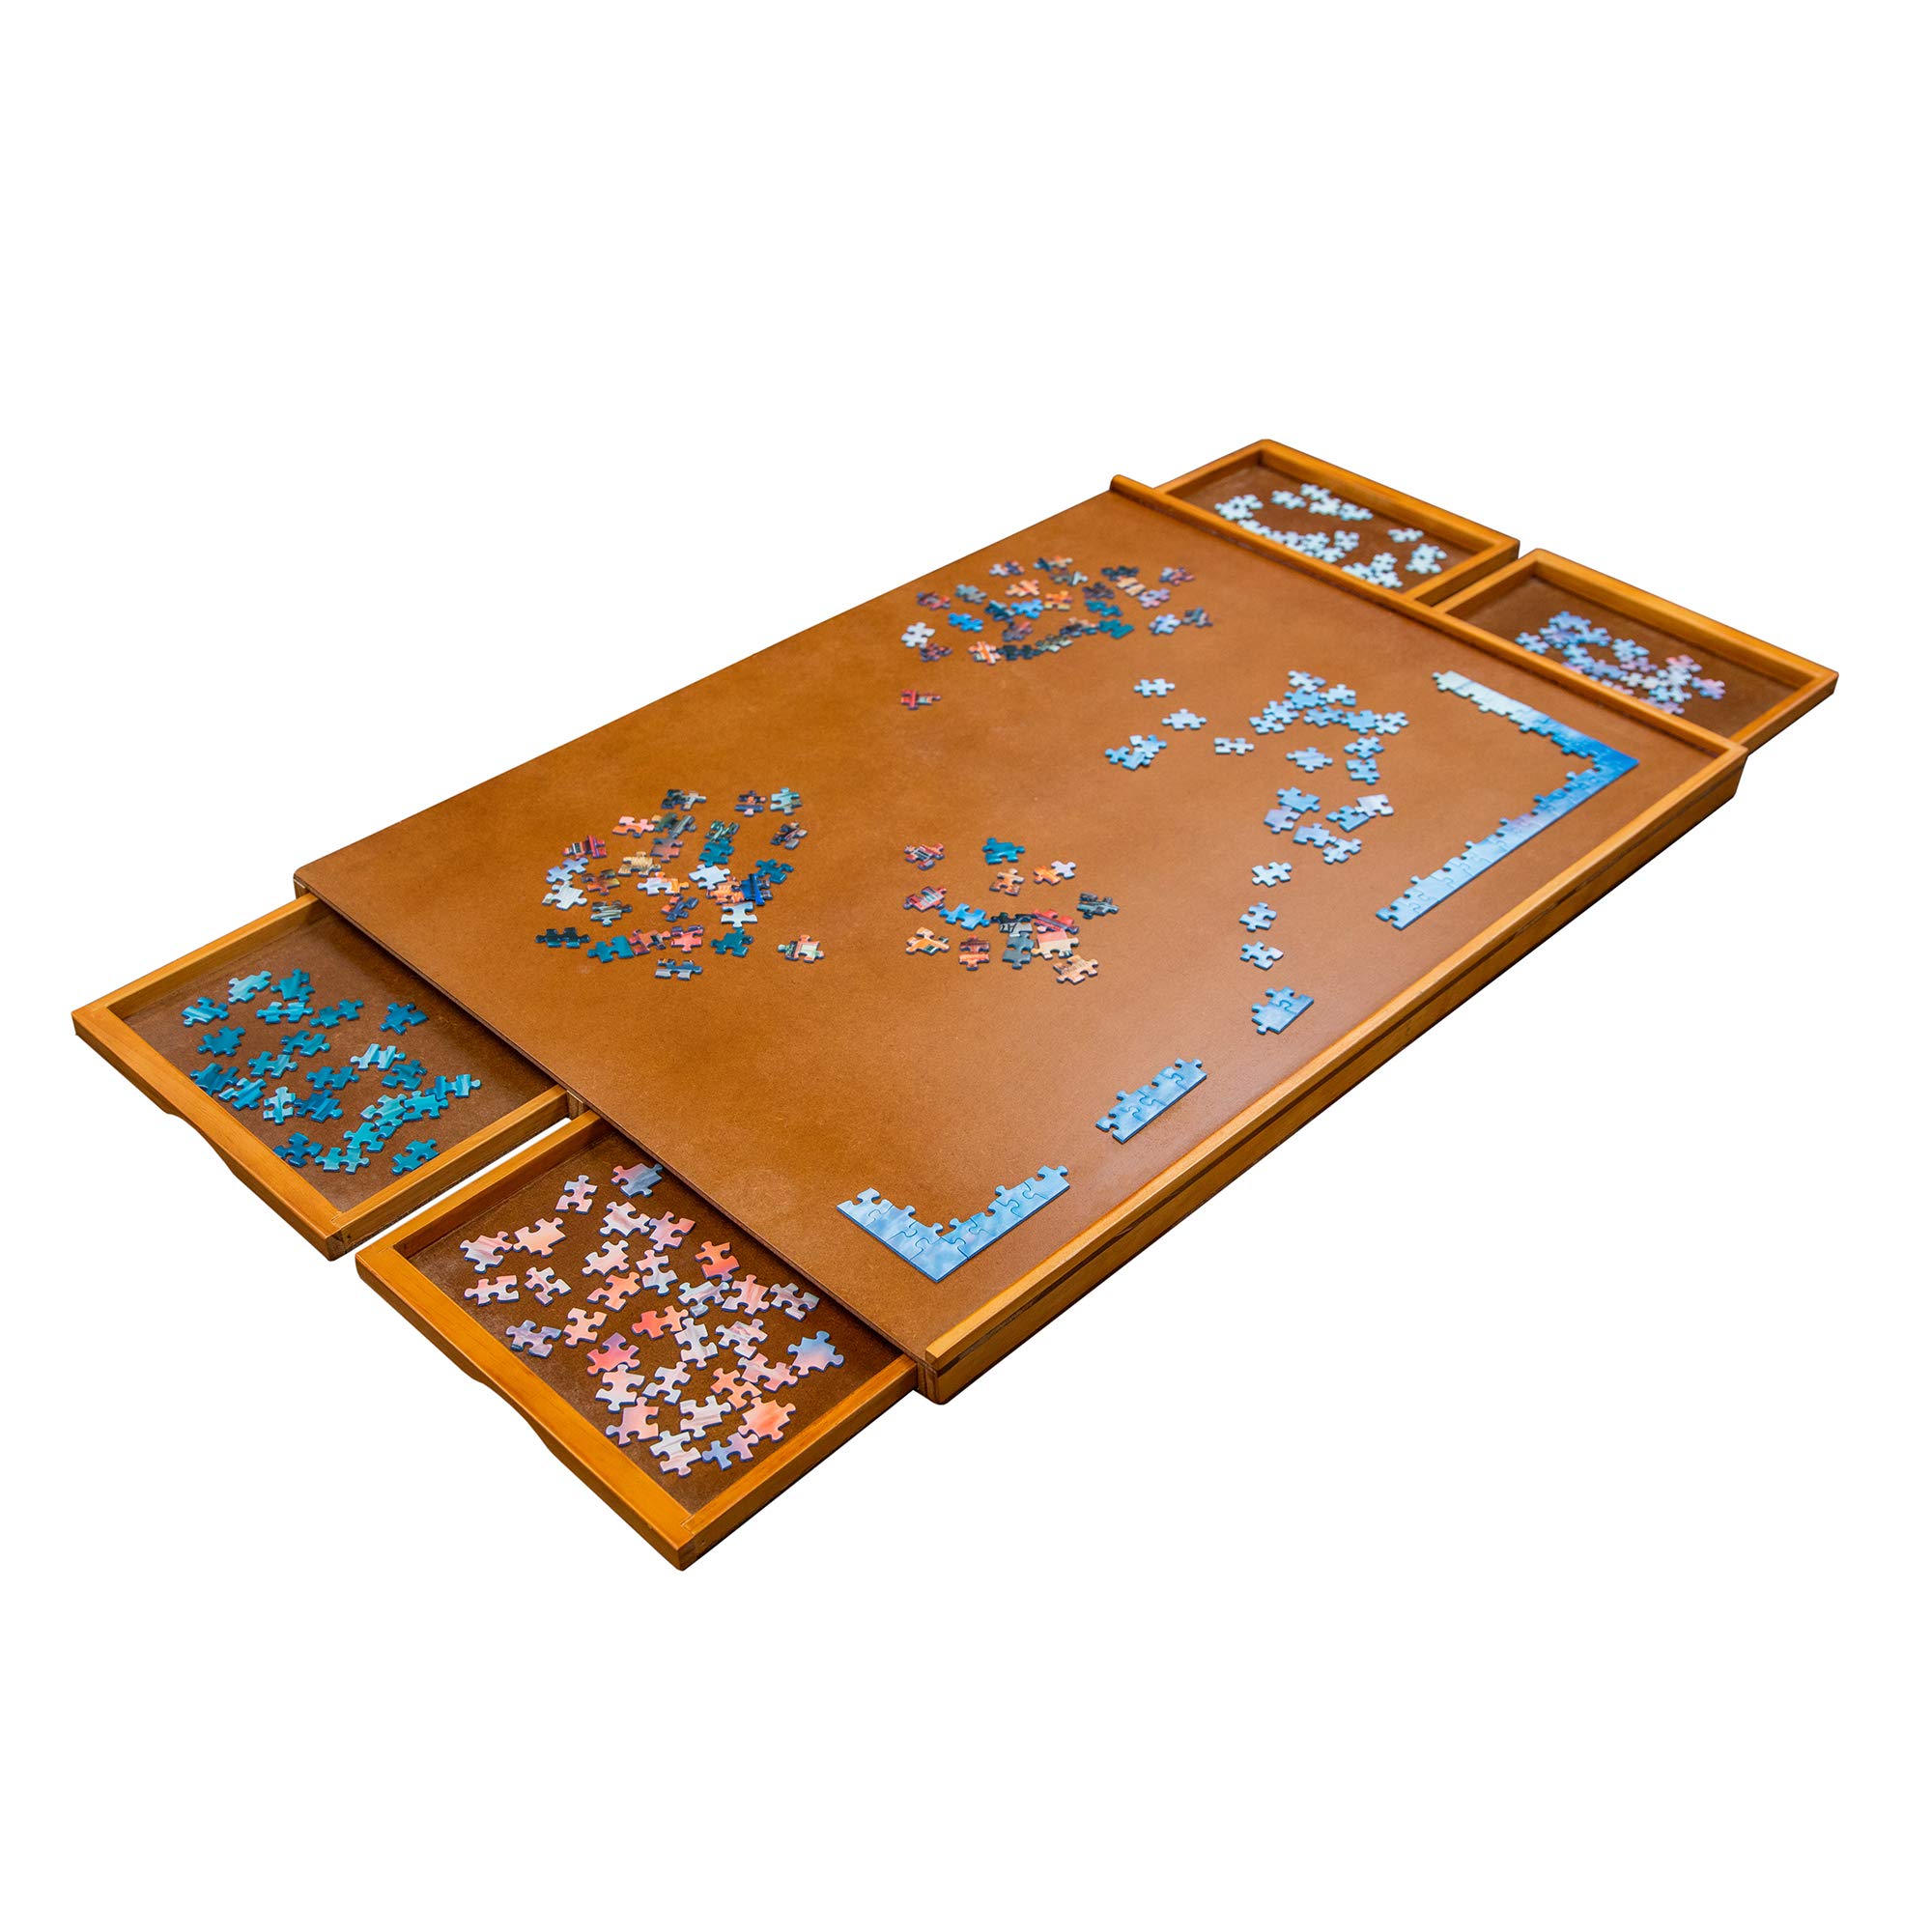 1000-Piece Puzzle Board | 23” x 31” Wooden Jigsaw Puzzle Table with 4 Removable